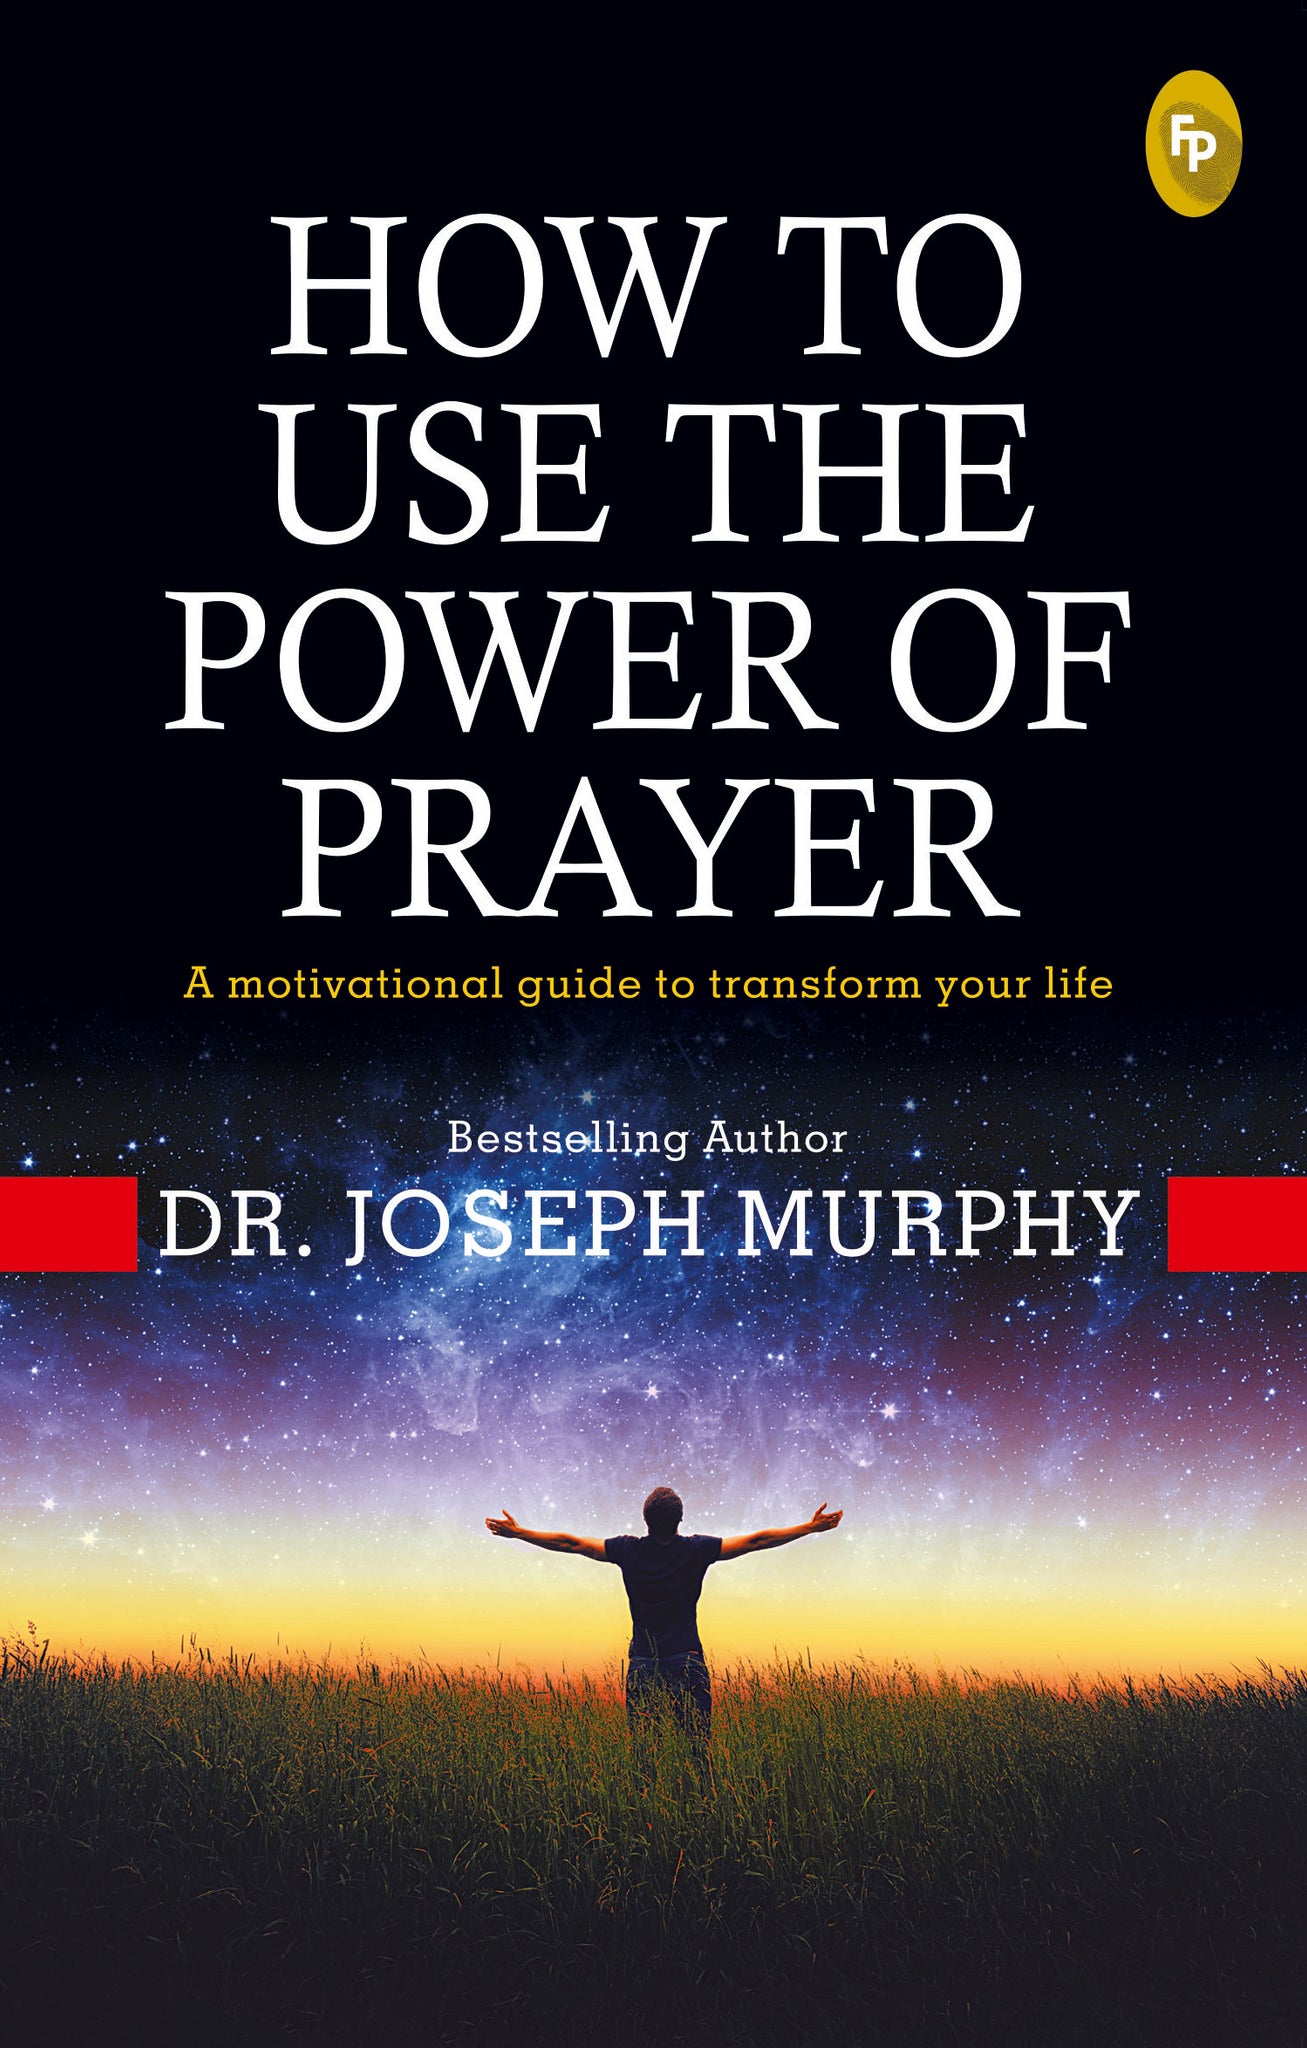 How To Use The Power of Prayer: A Motivational Guide to Transform your Life